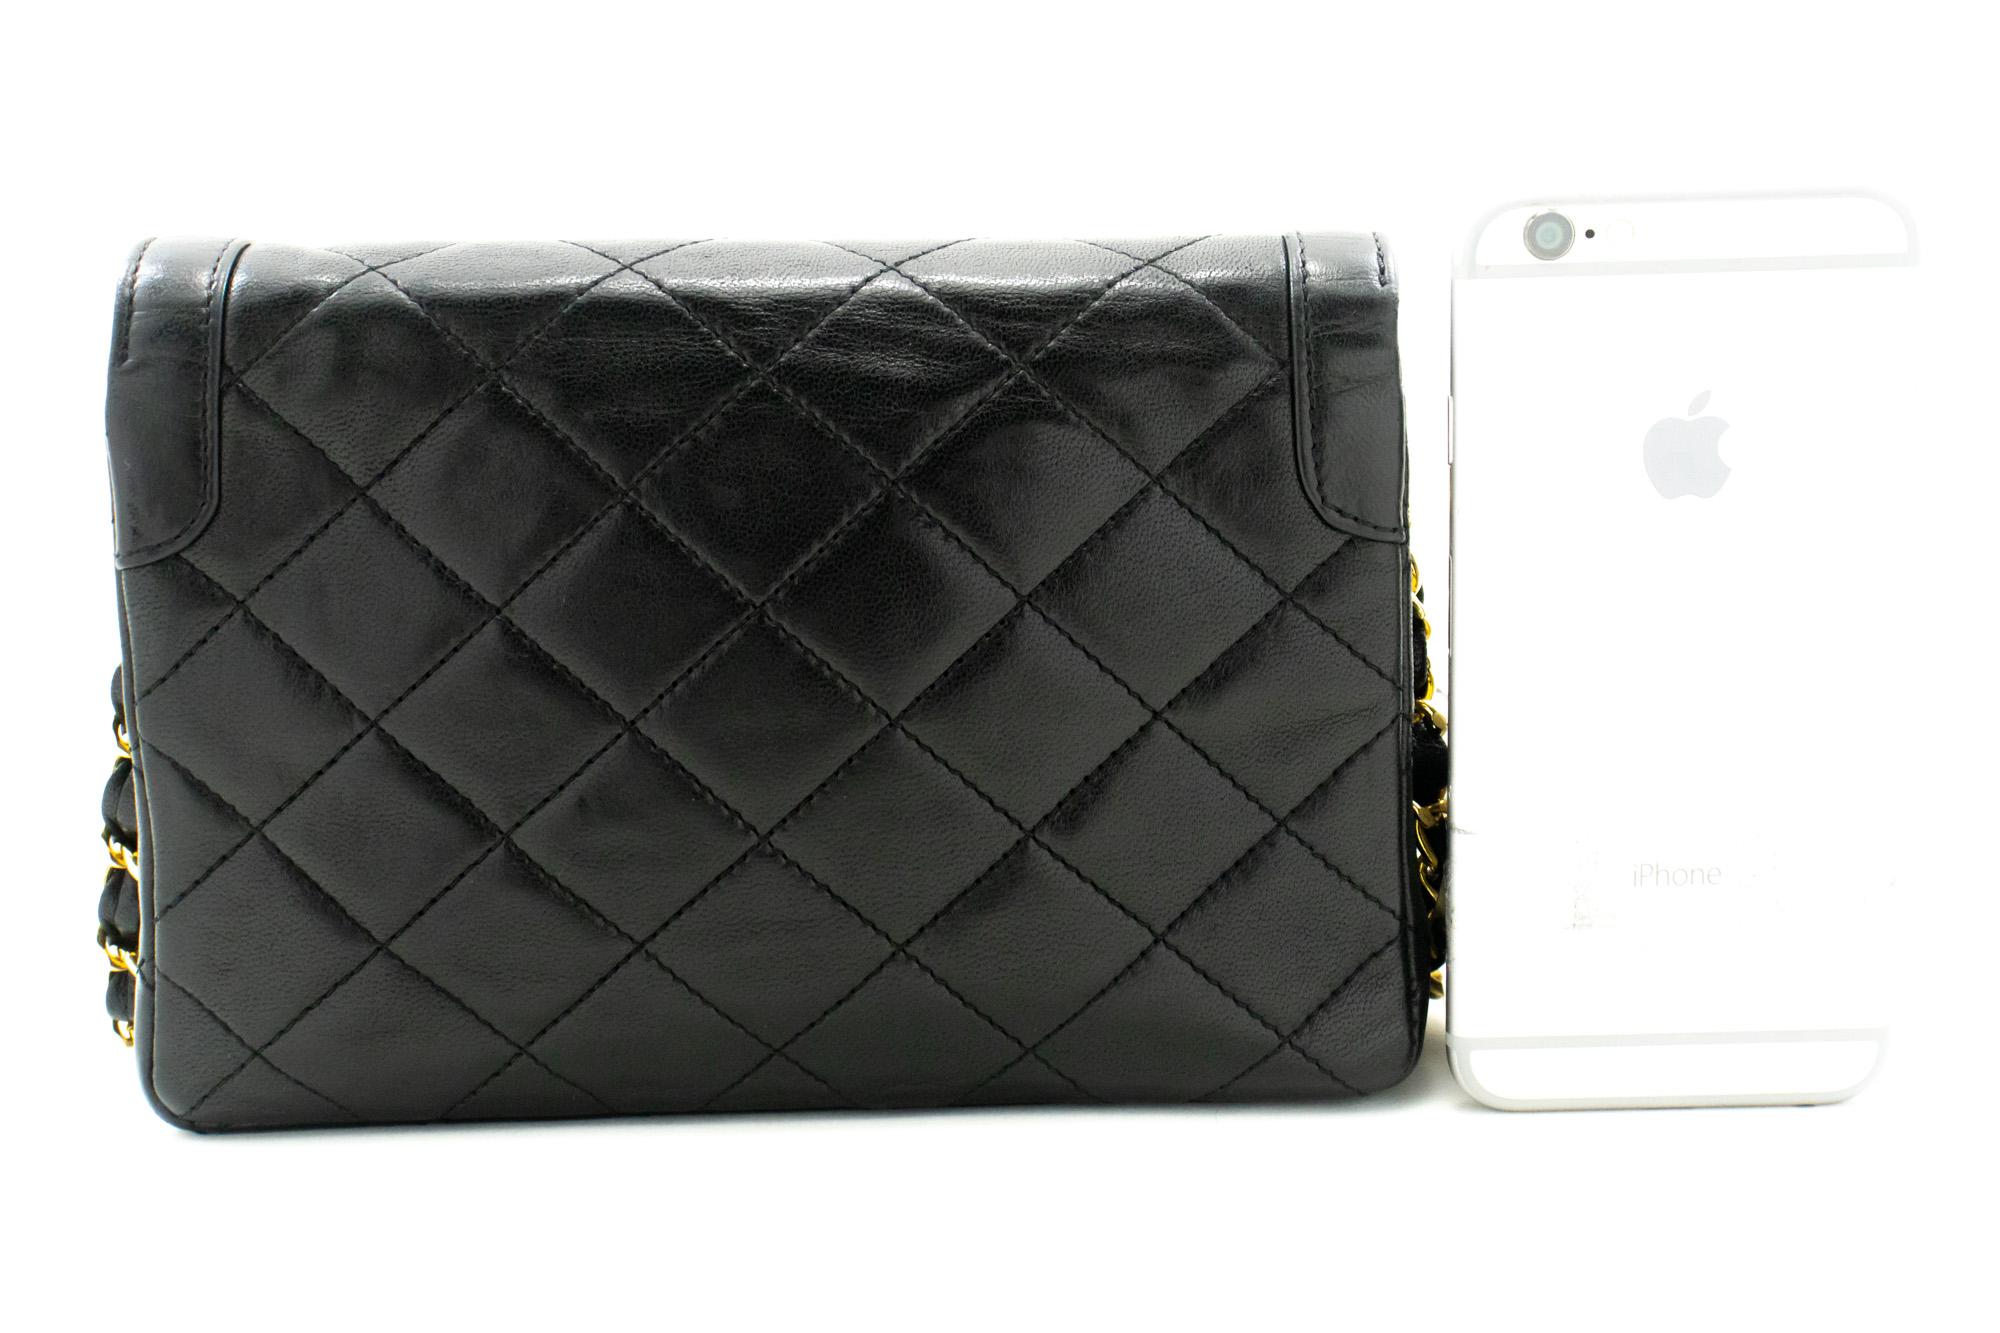 CHANEL Paris Limited Small Chain Shoulder Bag Black Flap Quilted In Good Condition For Sale In Takamatsu-shi, JP